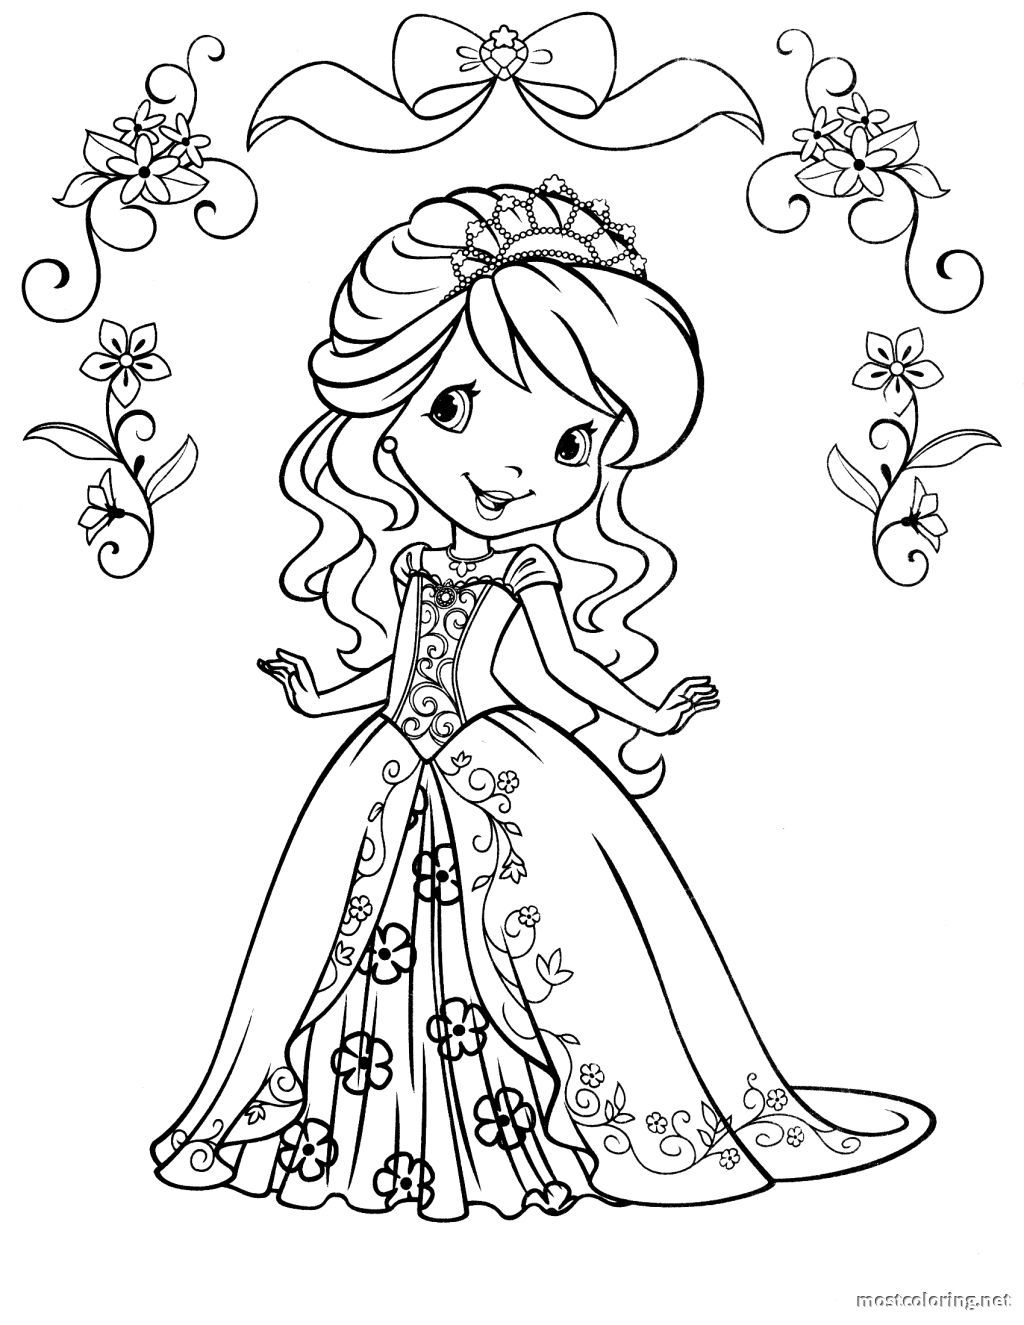 Strawberry Shortcake Coloring Pages To Print | Coloring Pages ...